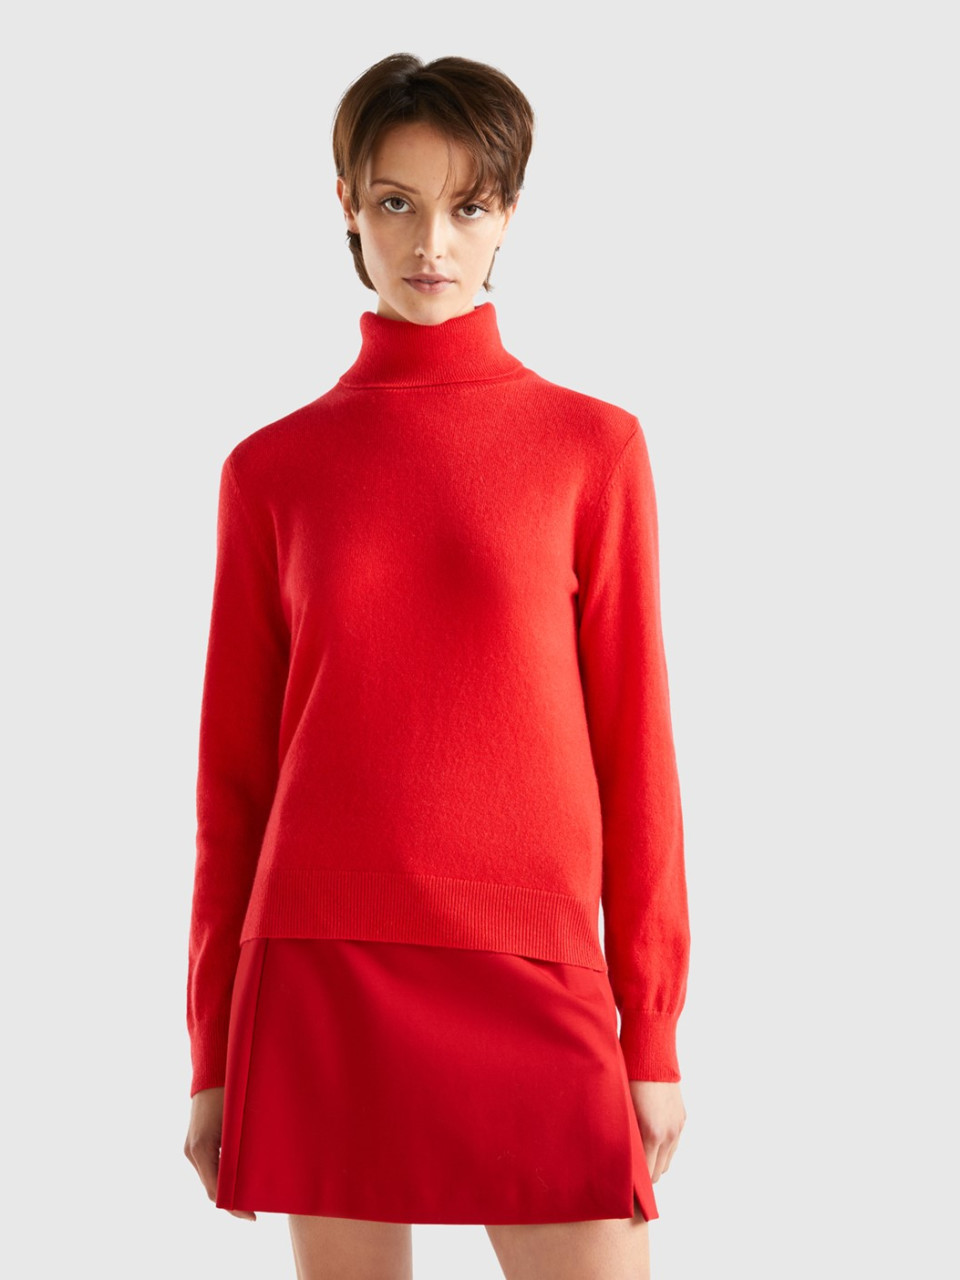 Benetton, Coral Red Turtleneck In Pure Cashmere, , Women